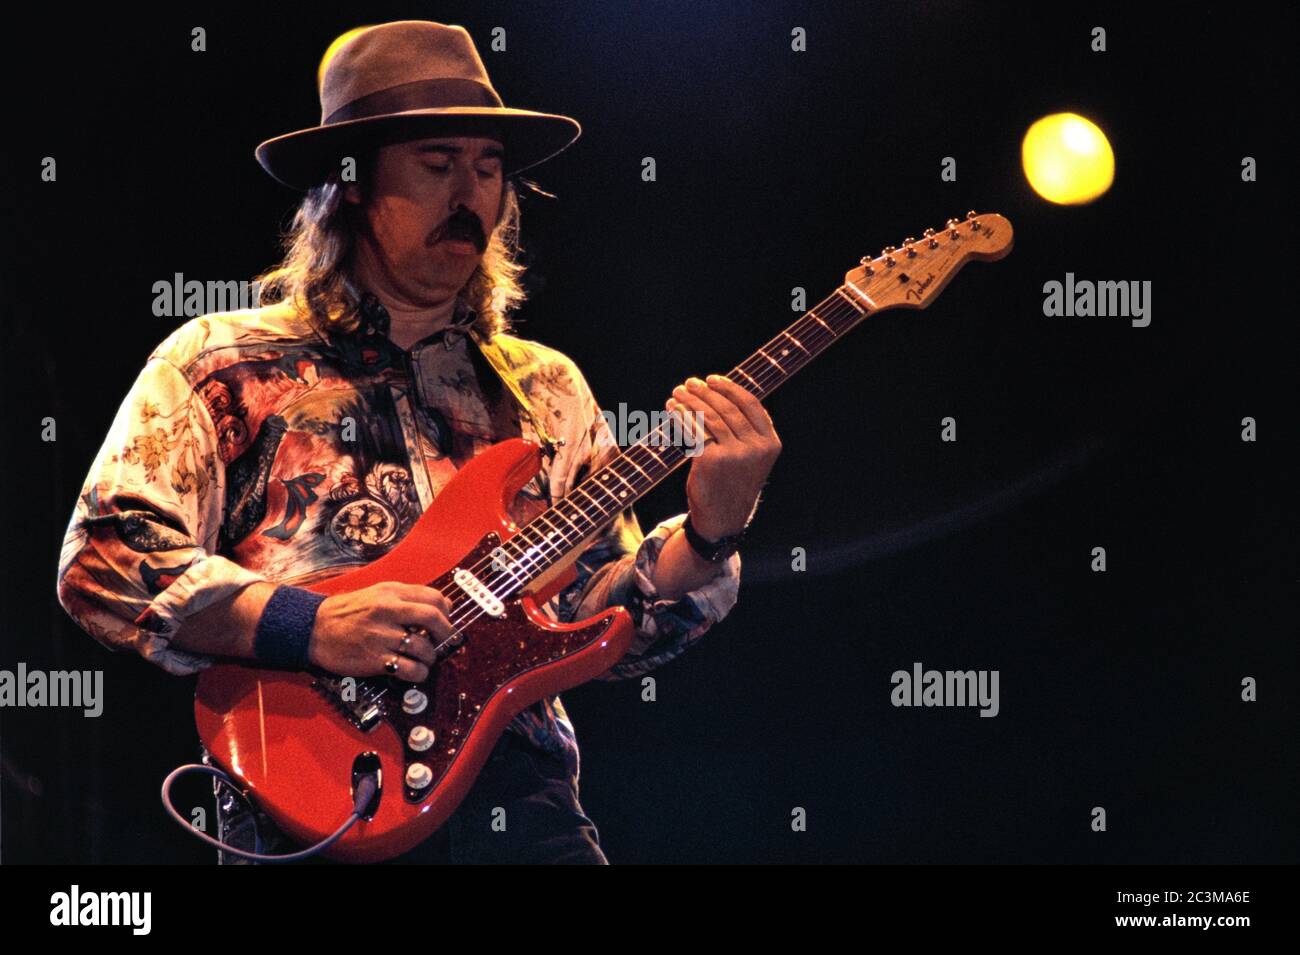 28.08.1993, Micky Moody from the Moody Marsden Band (ex-Whitesnake) live and open air on the stage at the 'Bock auf Rock - Norstedt Festival' with a Tokai Stratocaster. | usage worldwide Stock Photo